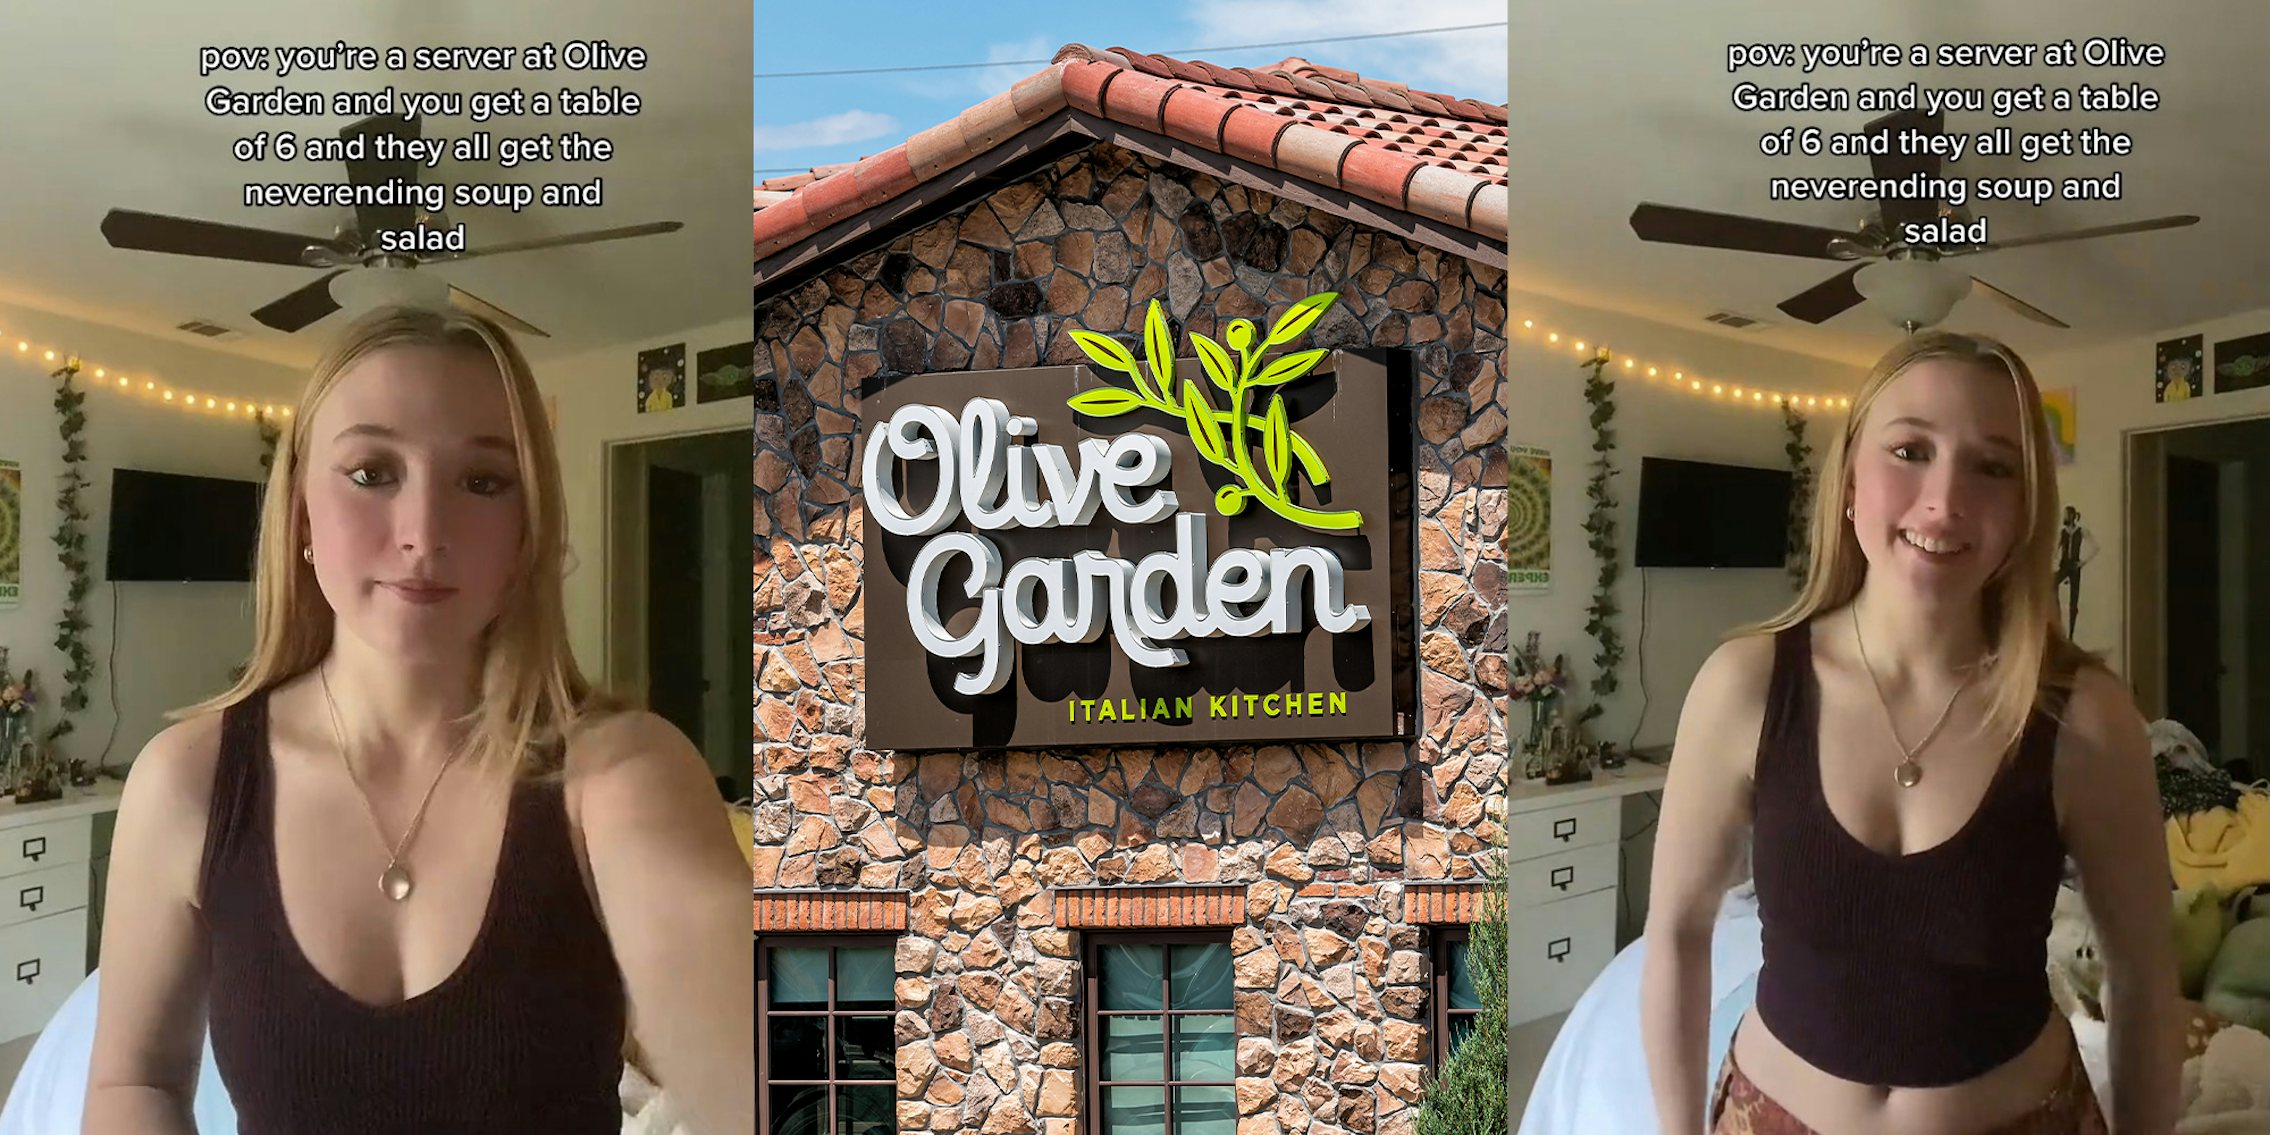 Woman Standing in Bedroom explaining about working at Olive Garden